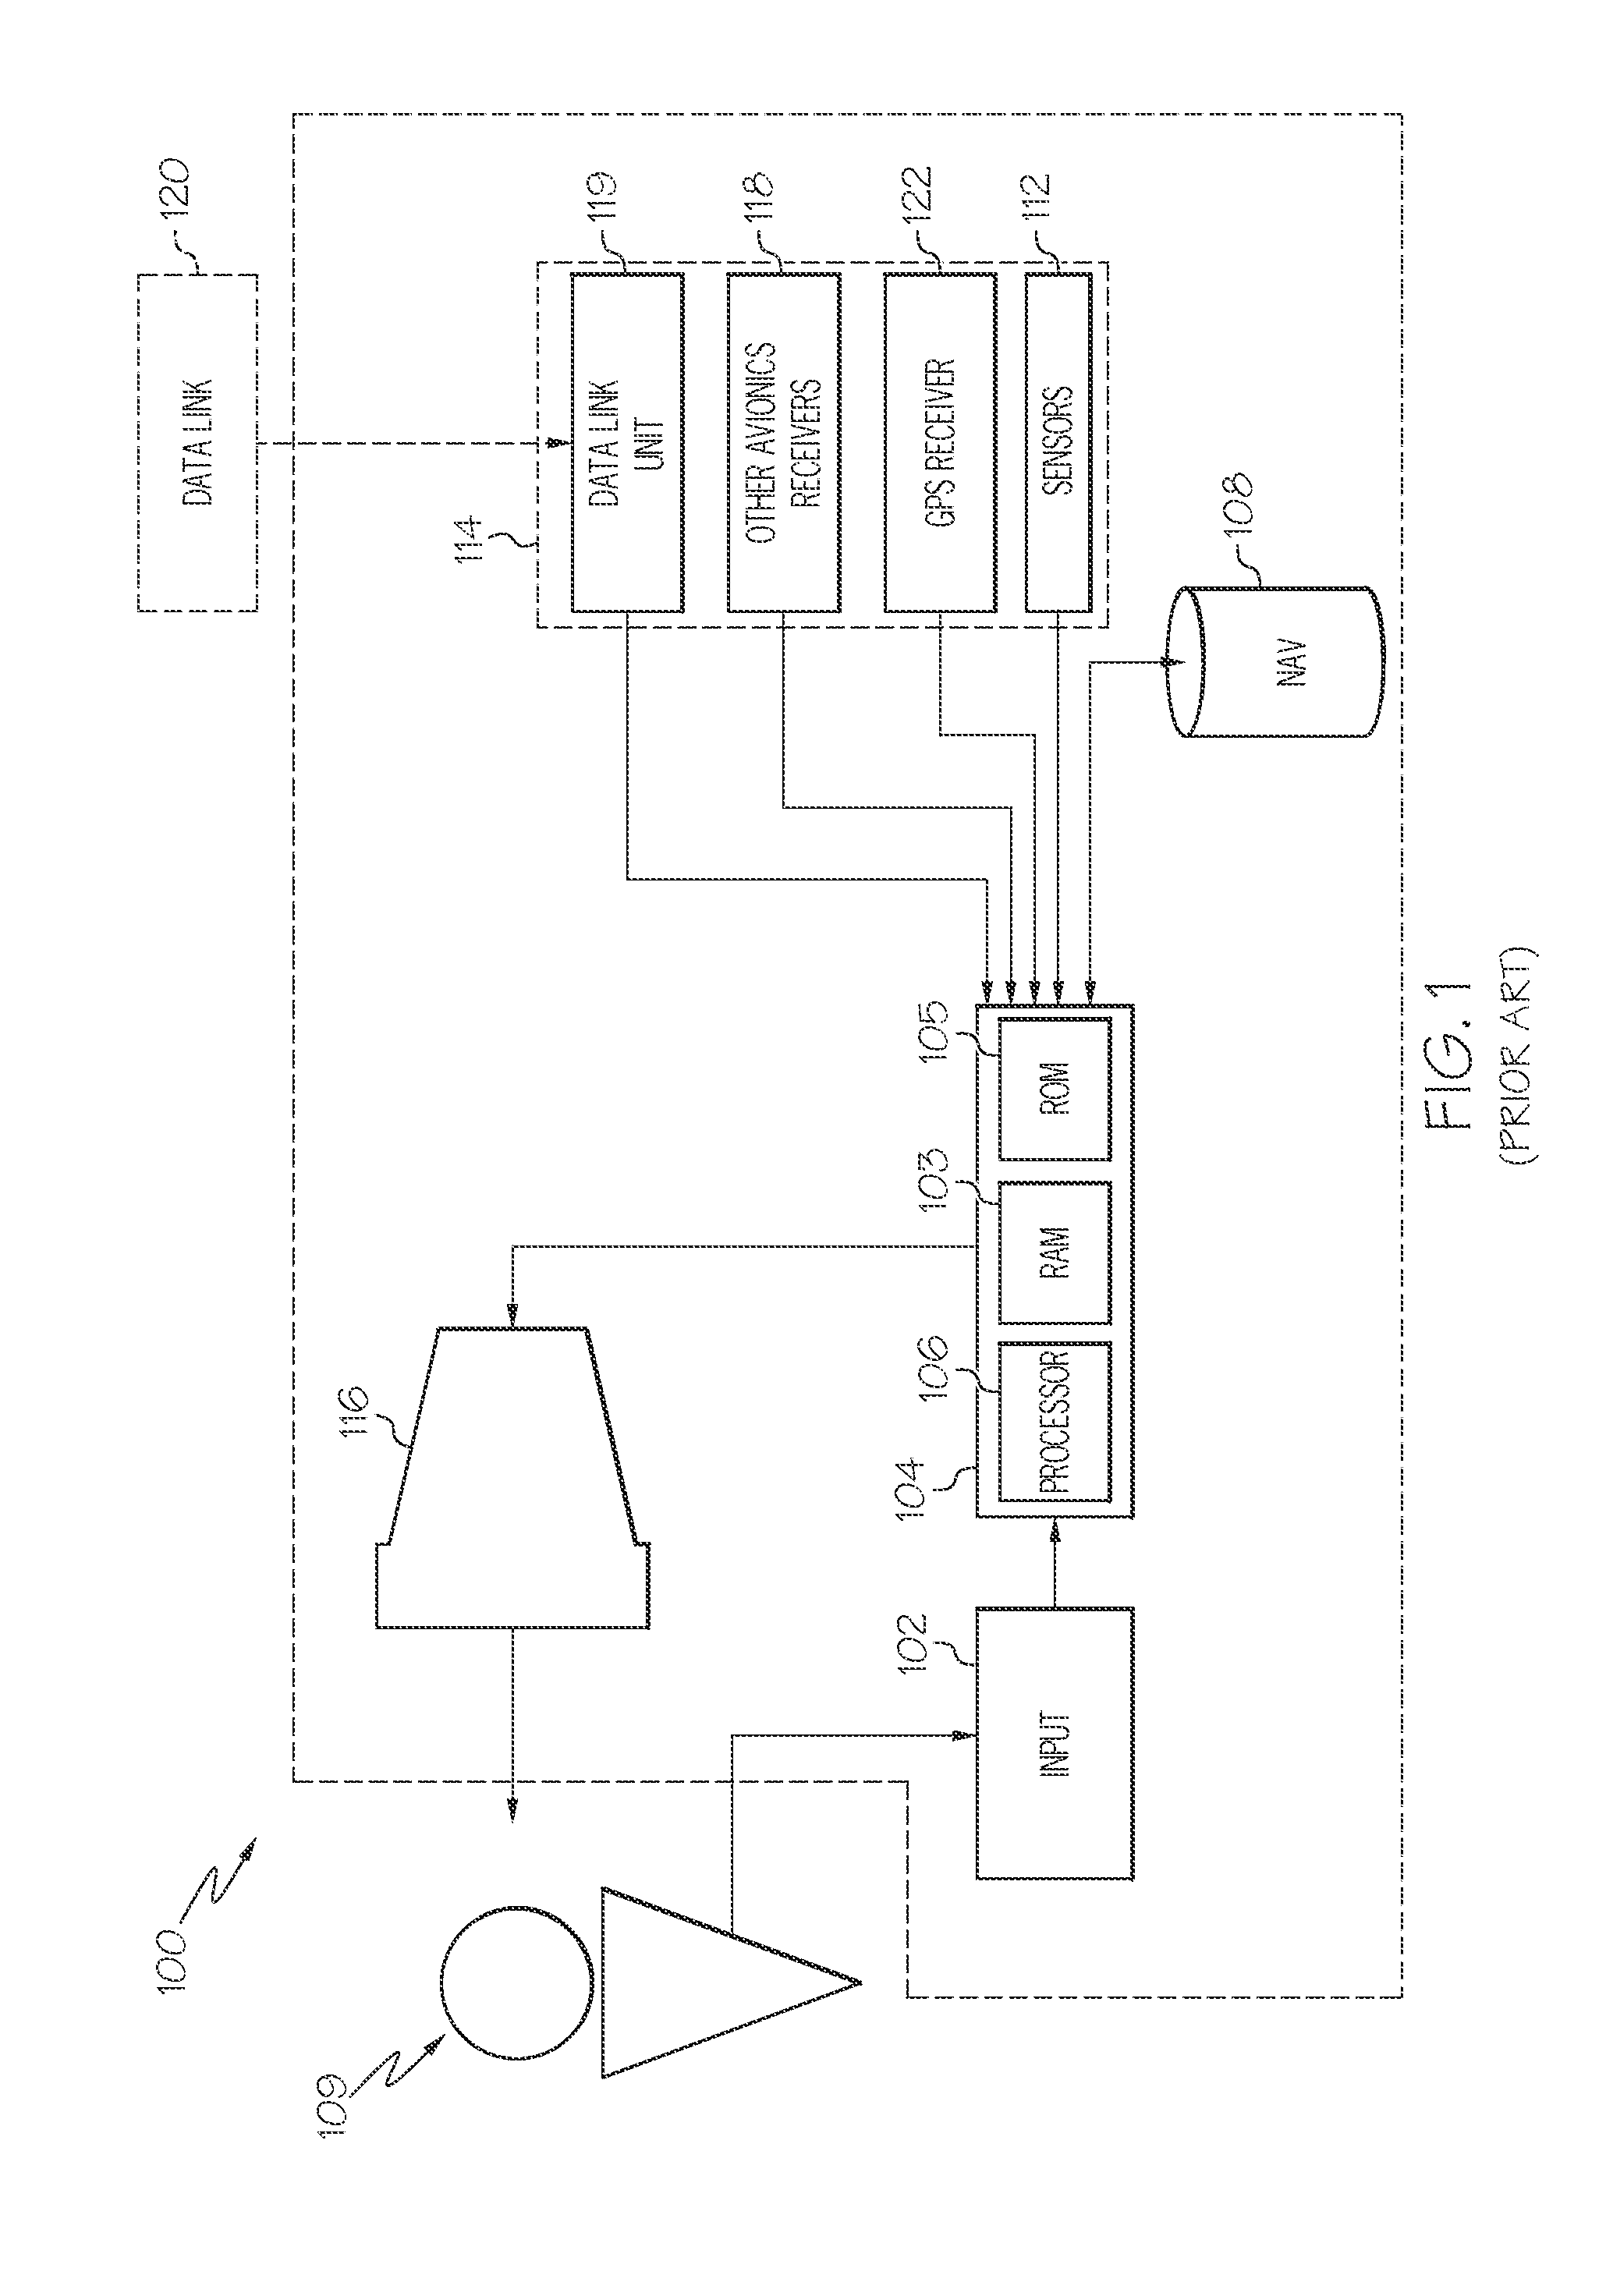 System and method for managing an interval between aircraft